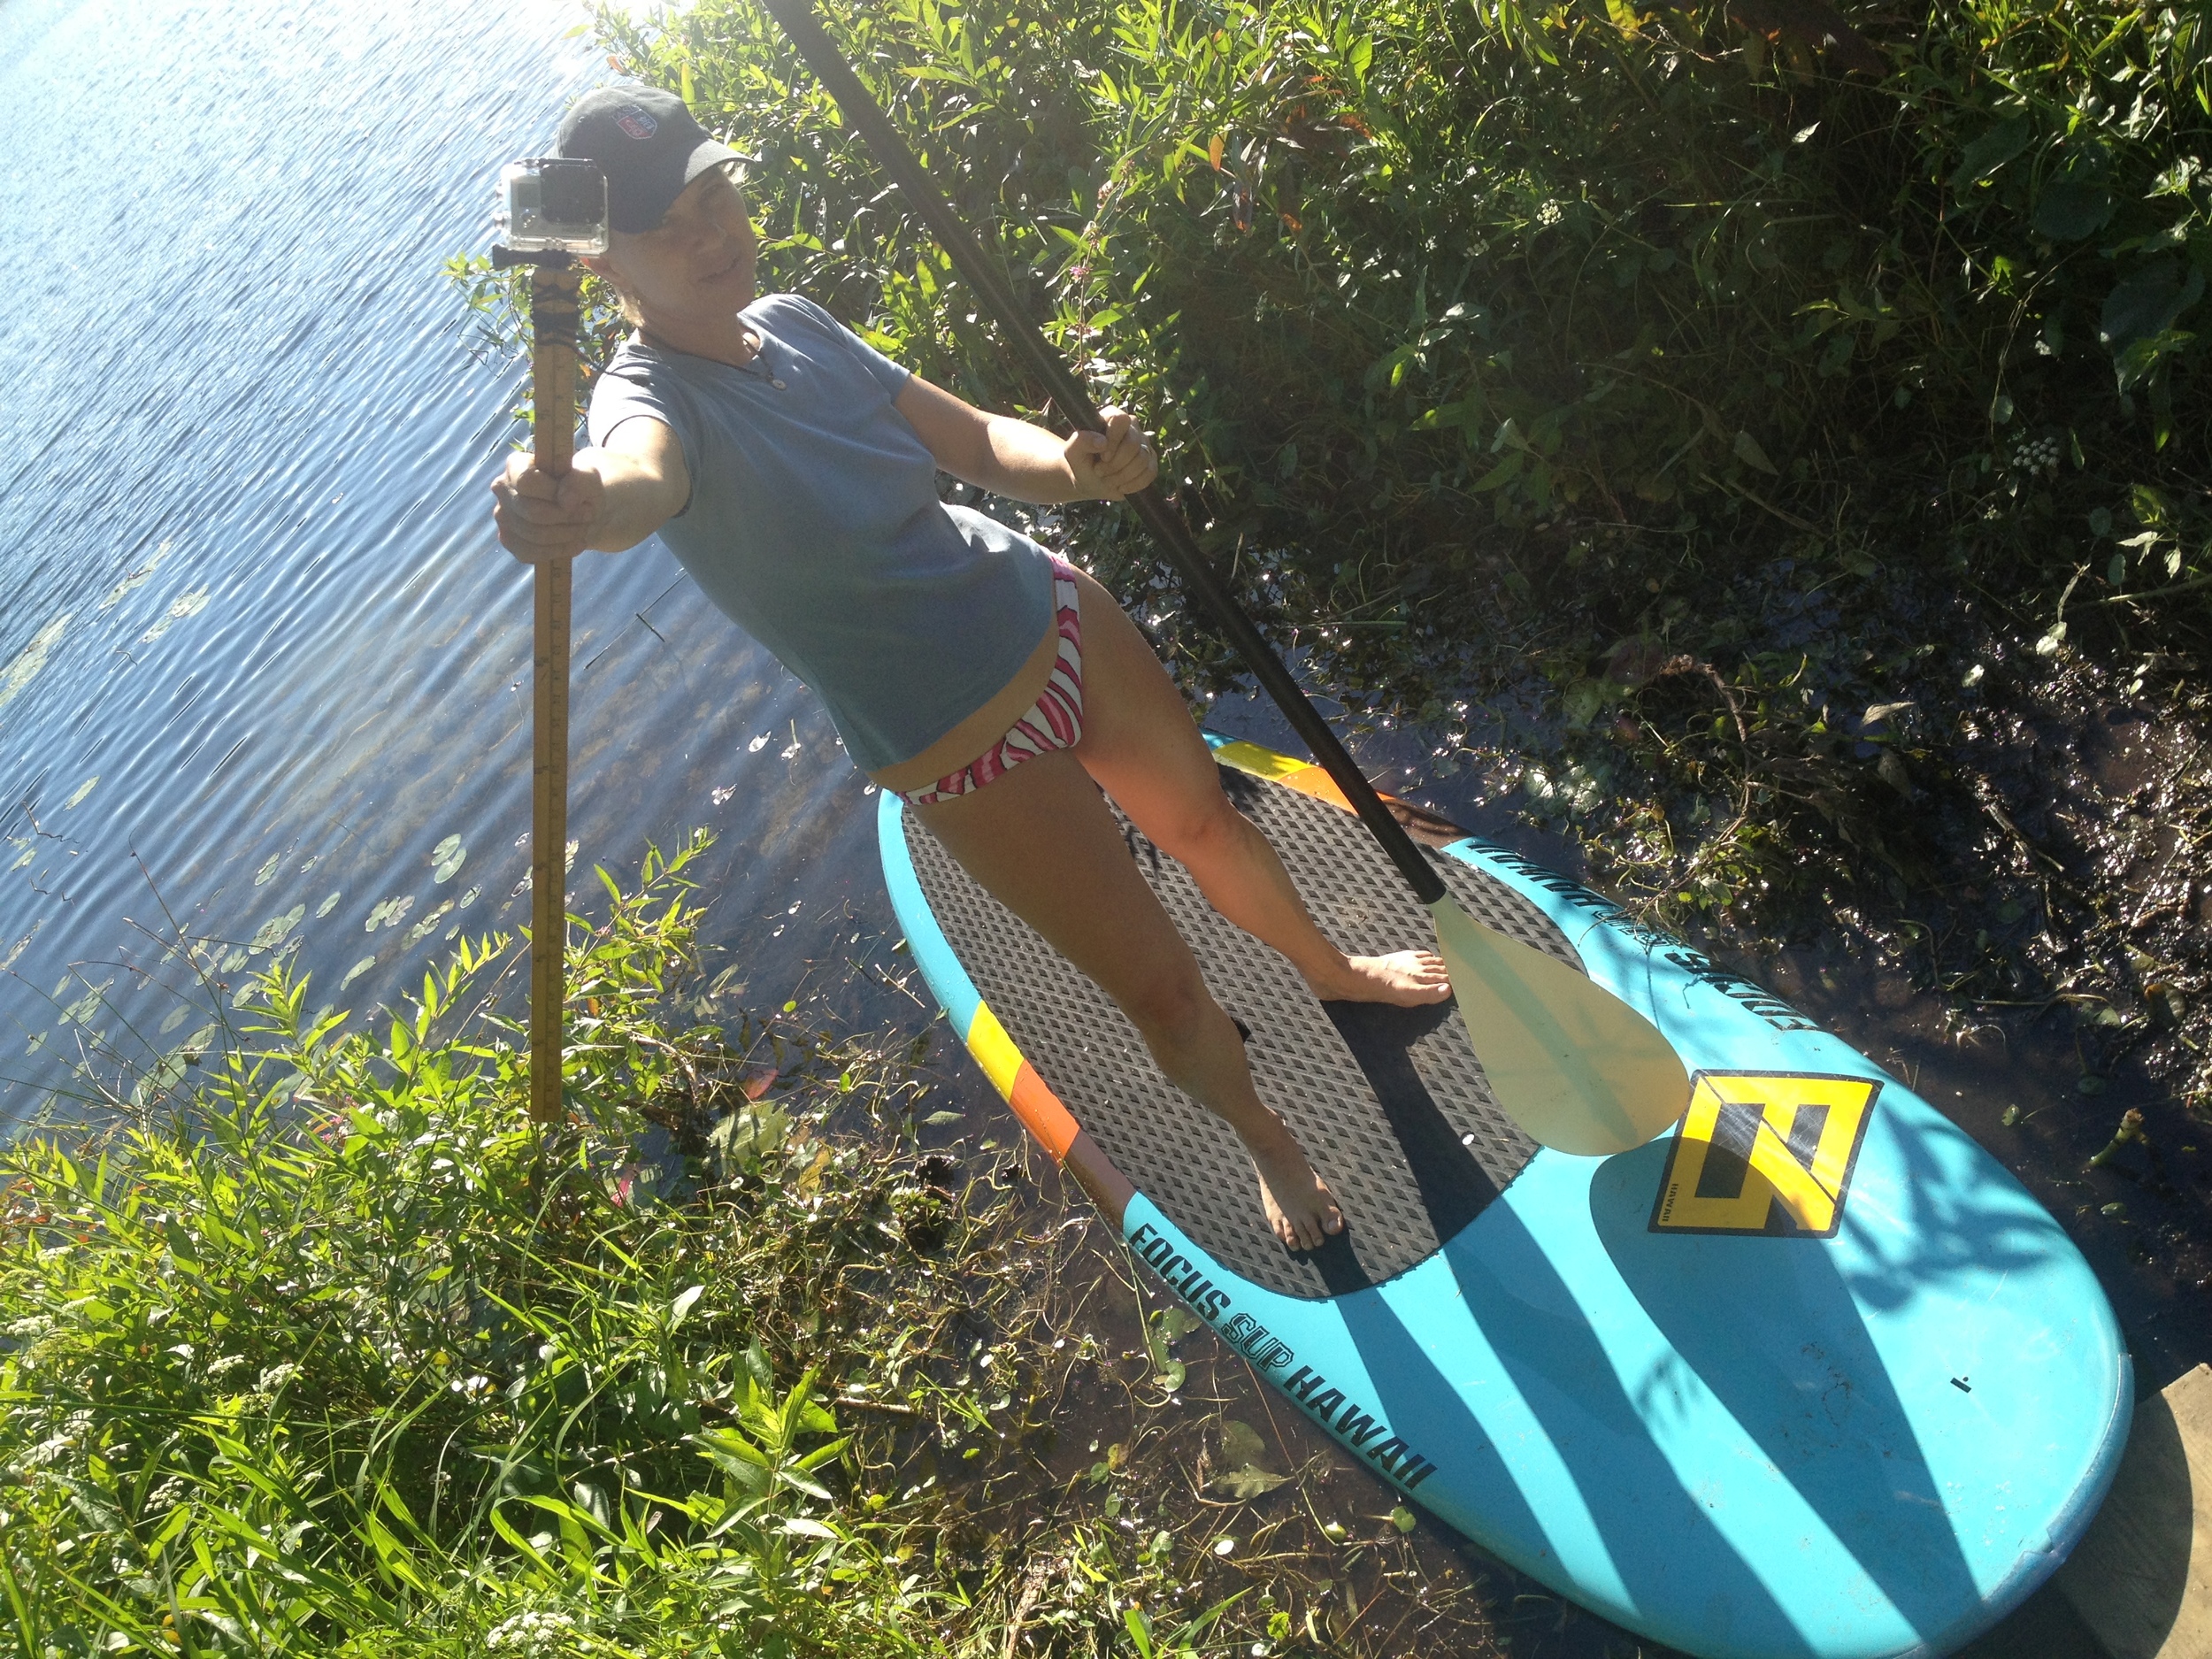  Madeleine on paddle board with Go Pro on a stick for Crystal Lake shoot 